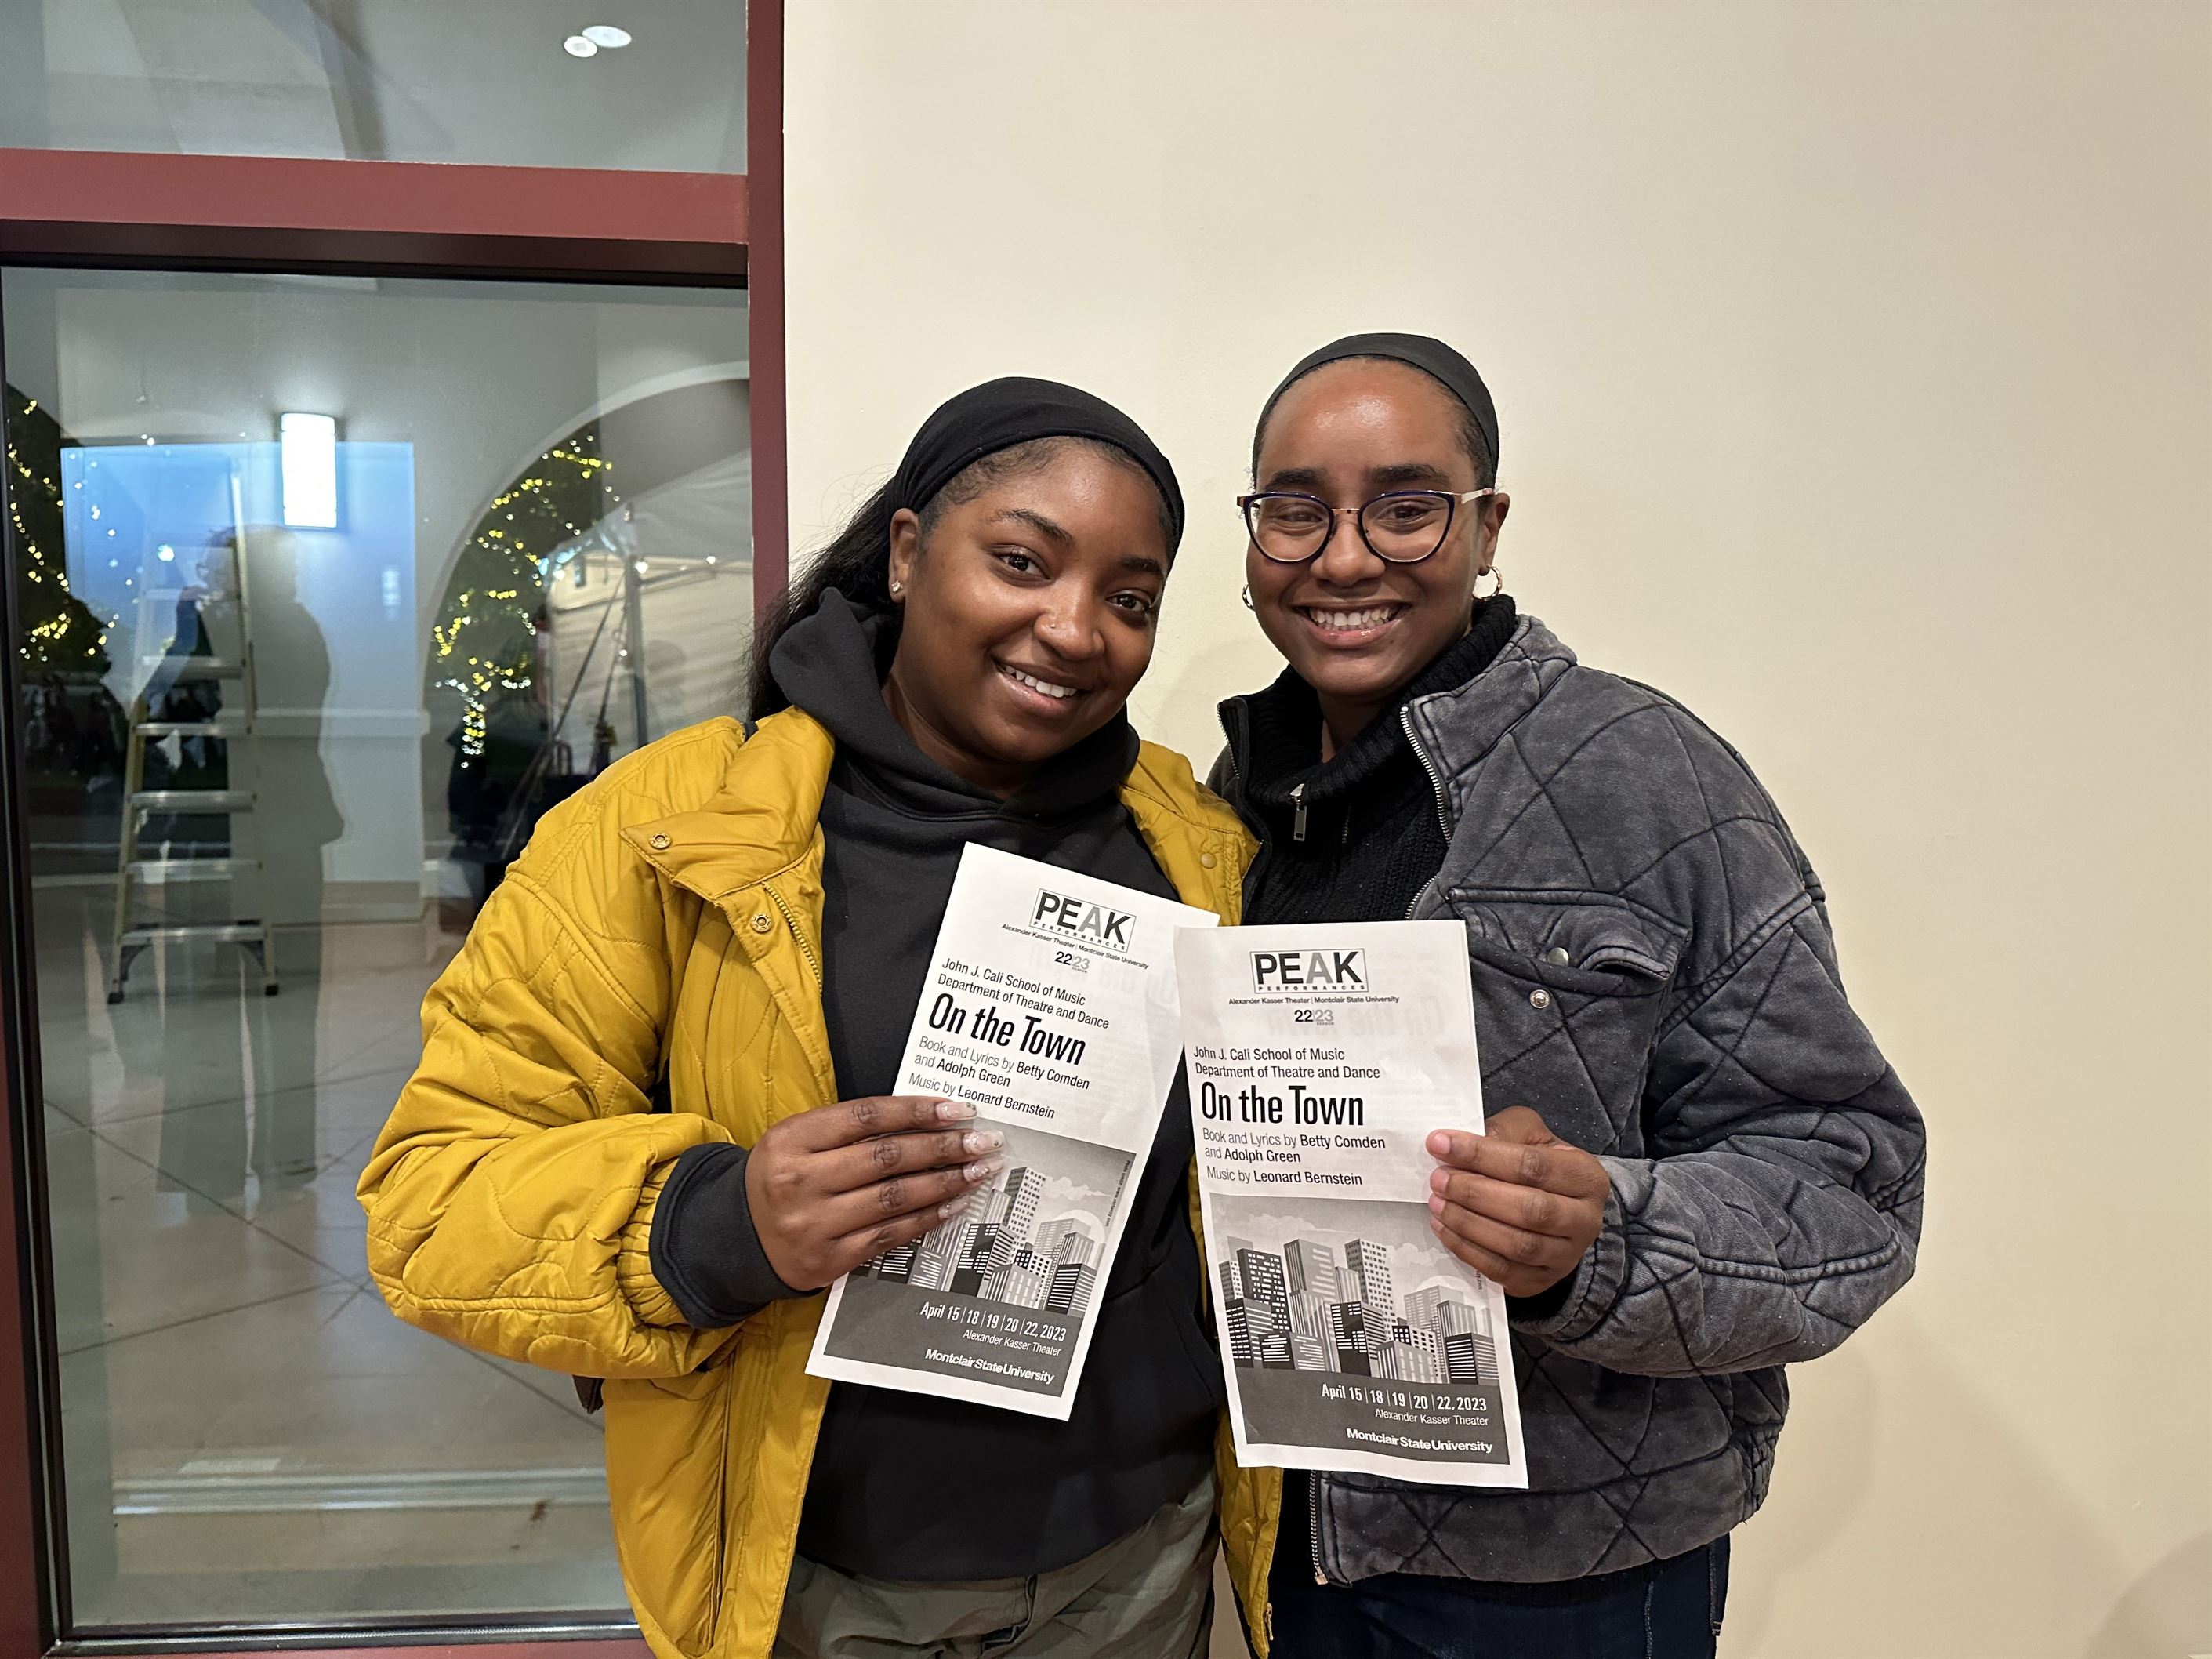 The Community Director for Machuga Heights, Ruqaiyah Lash, and the Assistant Community Director, Dakota Scavella, supporting fellow Residence Hall staff members in the show.